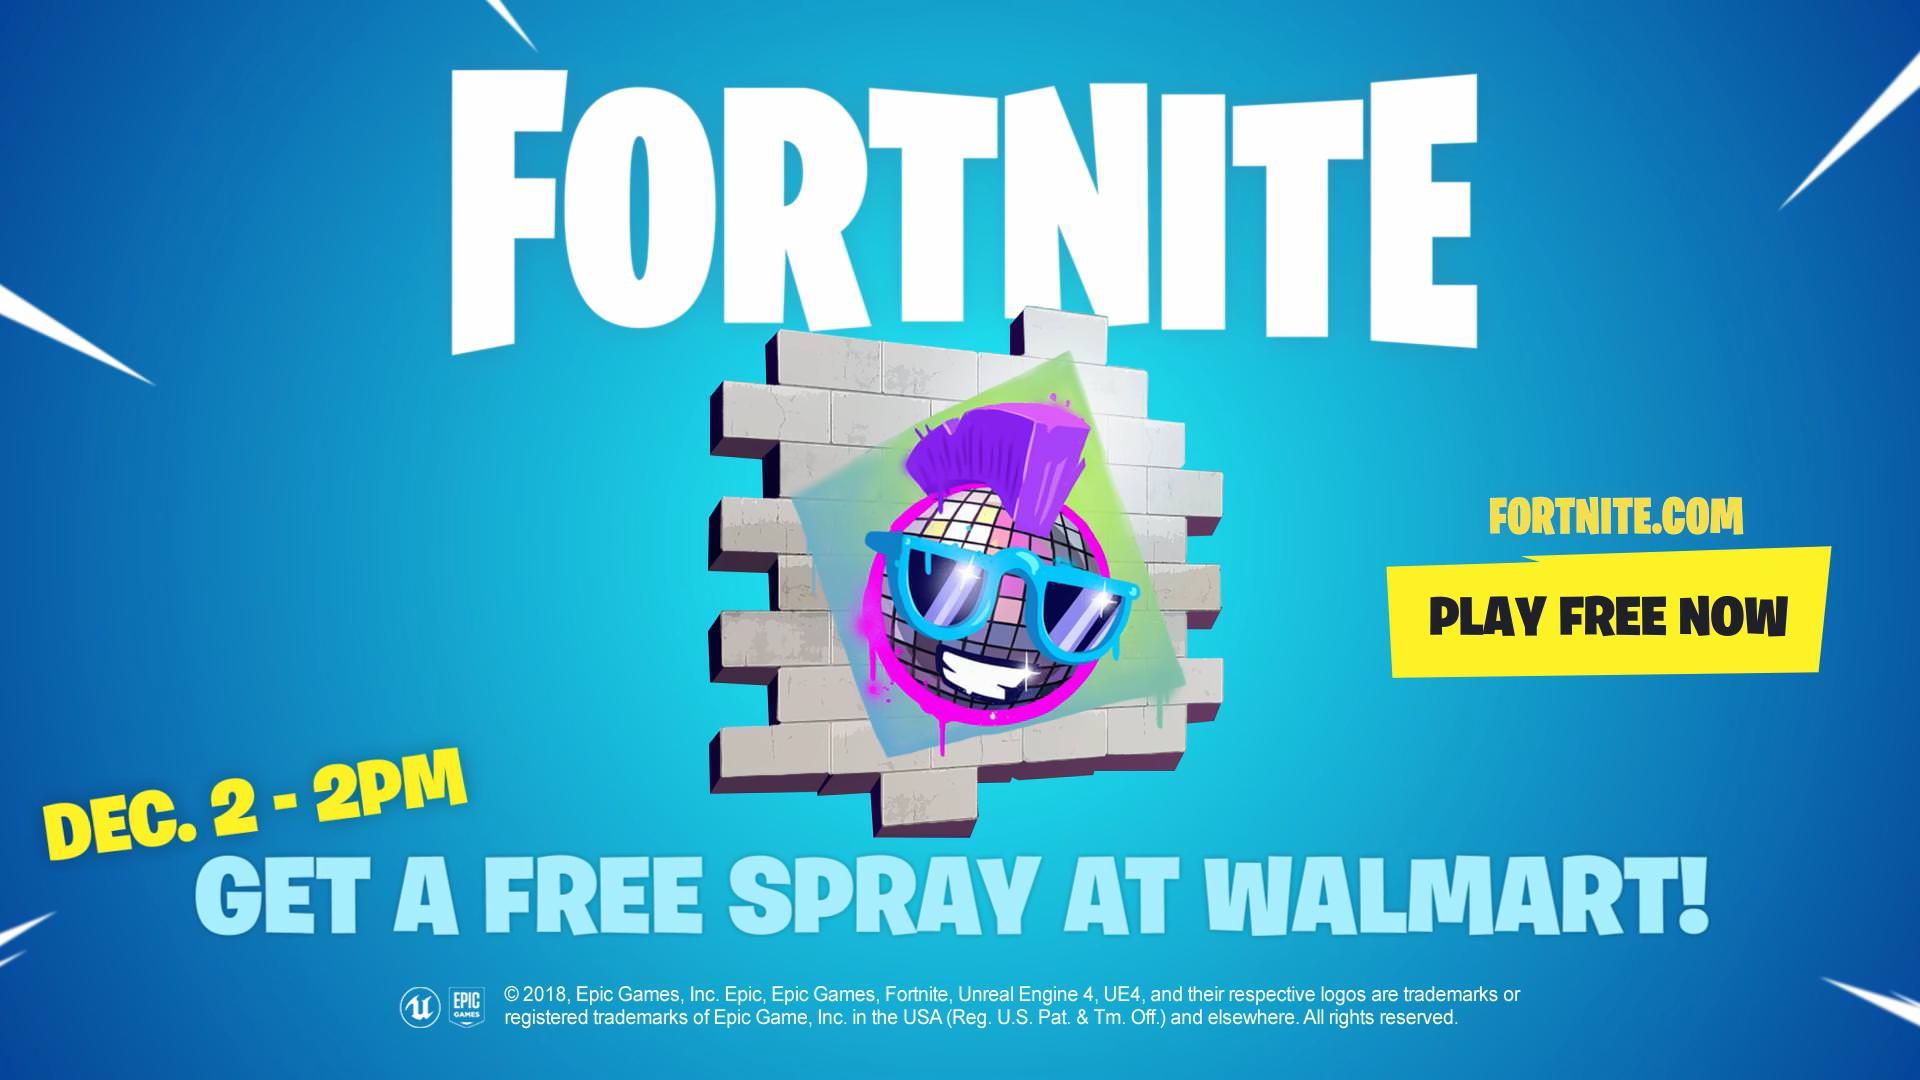 the spray looks similar but it was because fortnite temporarily made an existing boogie season 5 battle pass spray look like it most likely for testing - epic games info fortnite